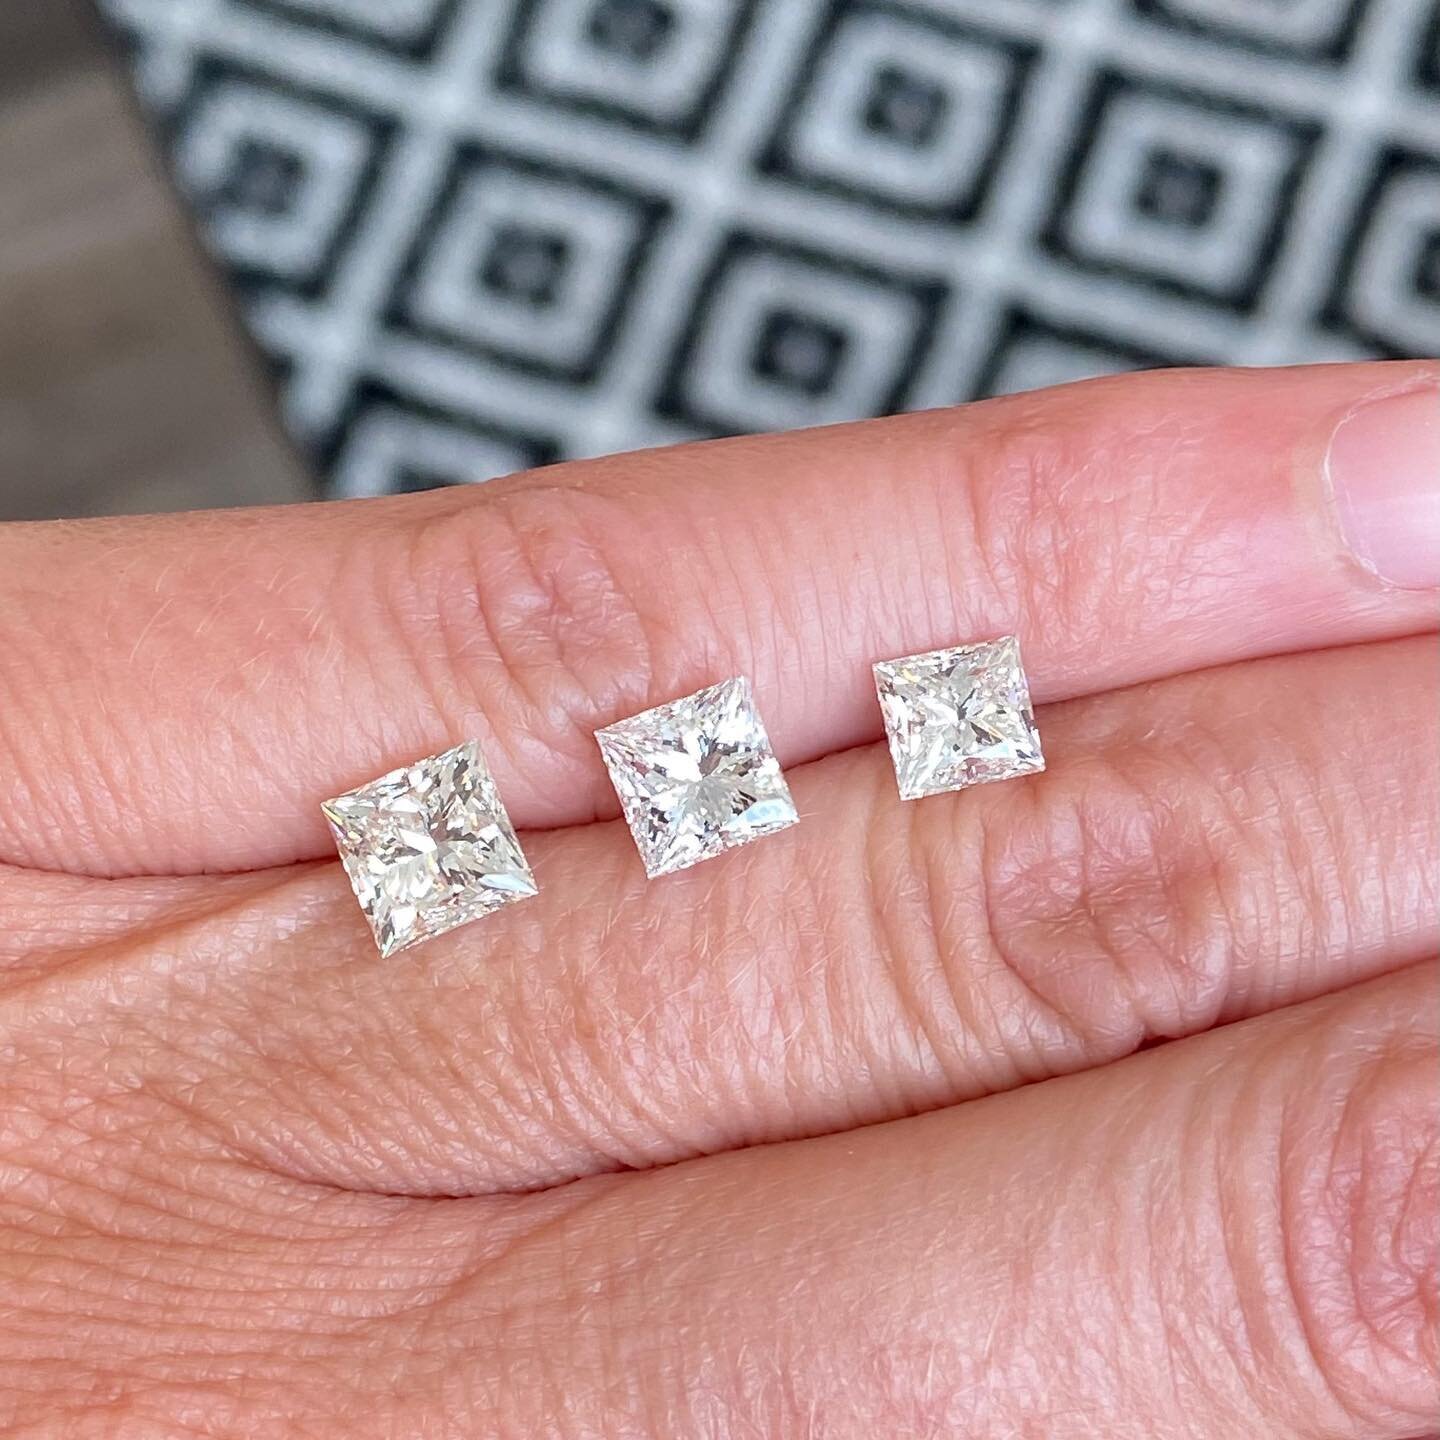 Did you know?
✨
The princess cut made its debut in 1979 and appears square or slightly rectangular in shape with pointed corners. Belonging to the brilliant cut group, the facets are arranged to maximize the stones fire. This unique cut was designed 